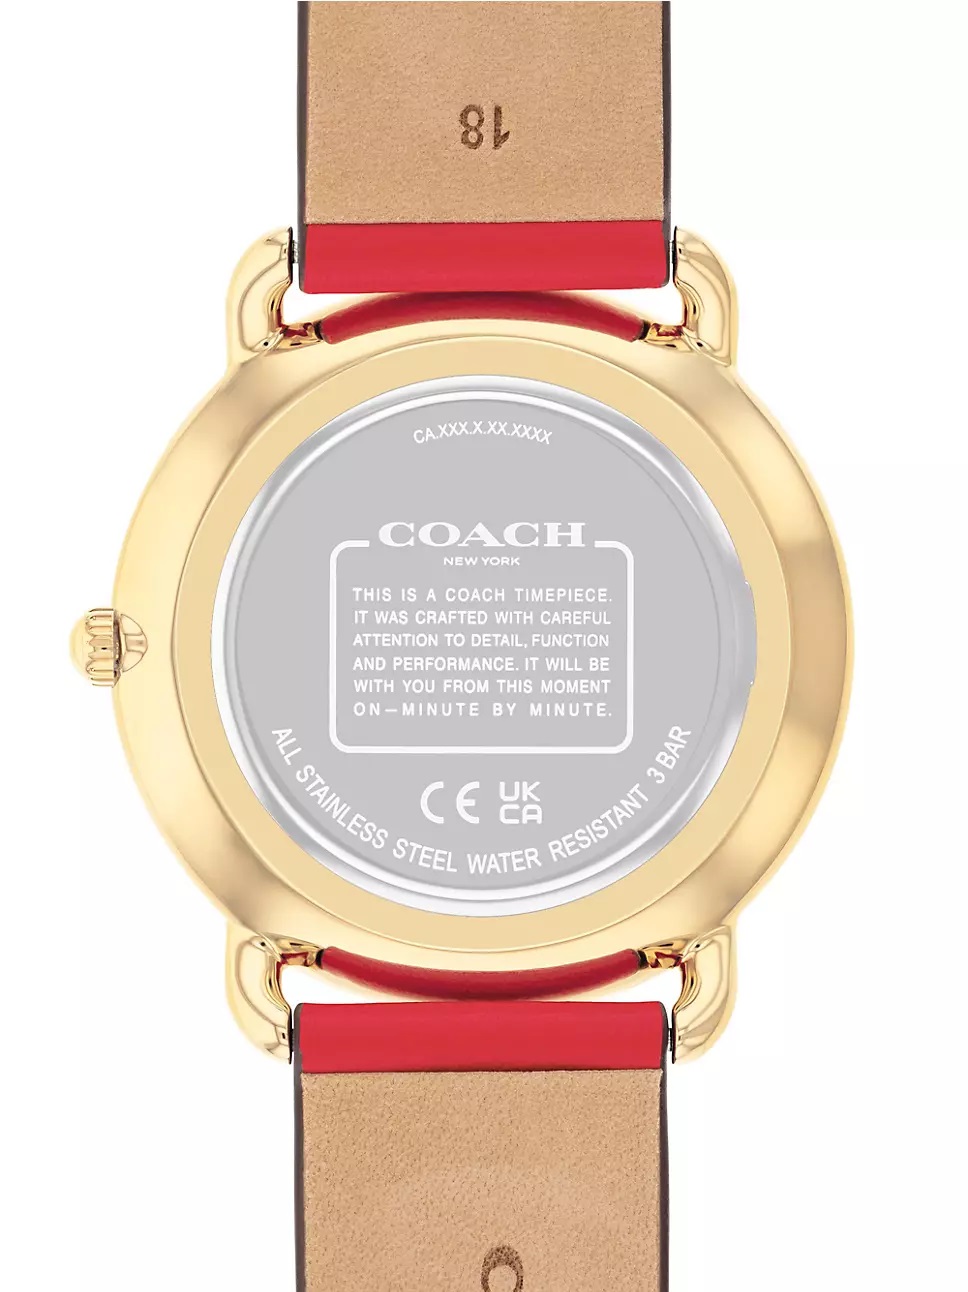 ĐỒNG HỒ NỮ COACH ELLIOT RED LEATHER ANALOG WOMEN WATCH CO-14504249 7